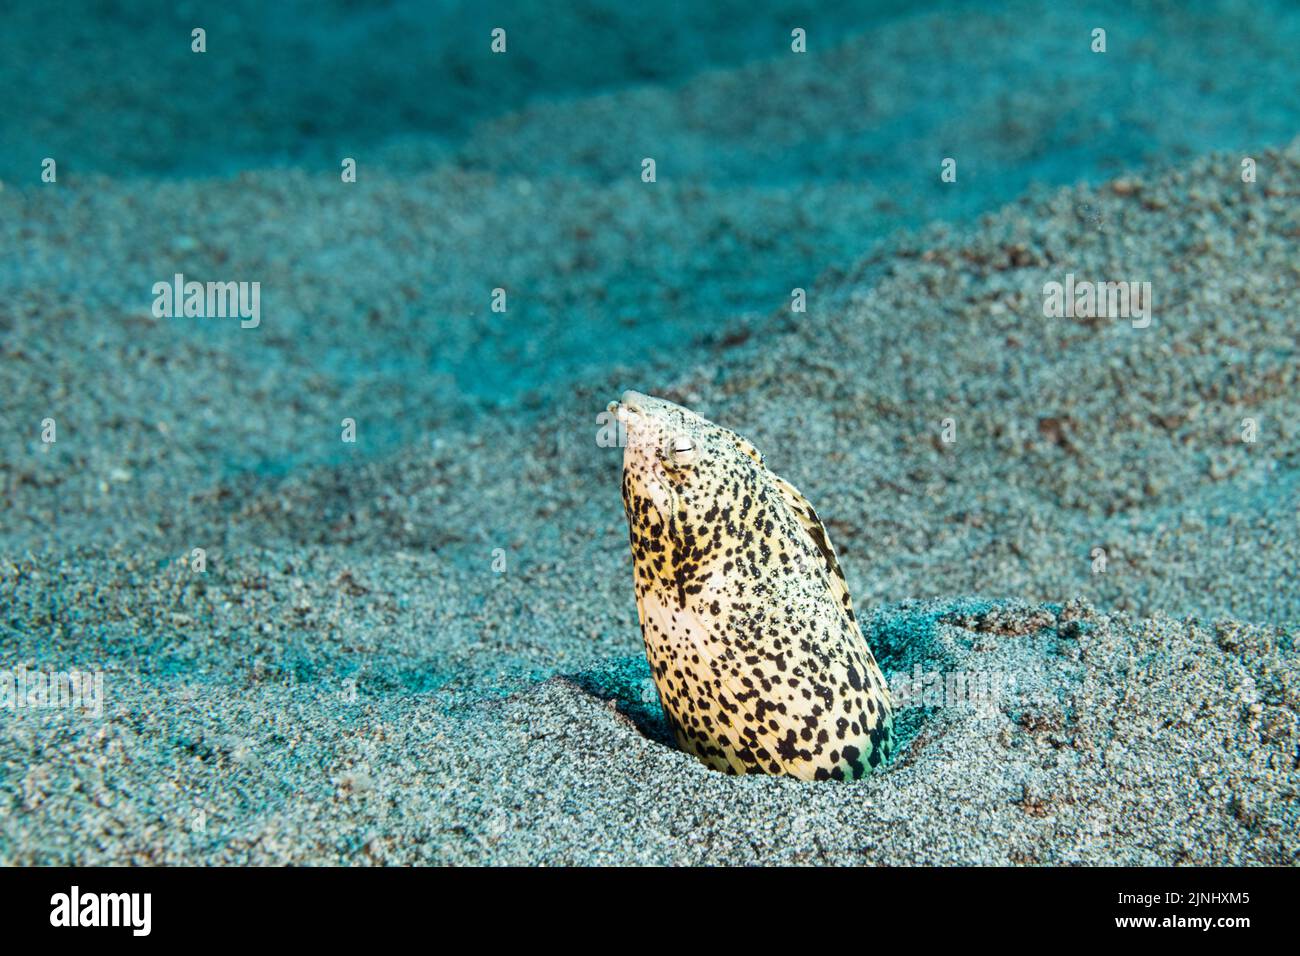 freckled snake eel or yellowspotted snake eel, Callechelys lutea ( endemic species ), Hookena, South Kona Coast, Hawaii, U.S.A., Central Pacific Ocean Stock Photo